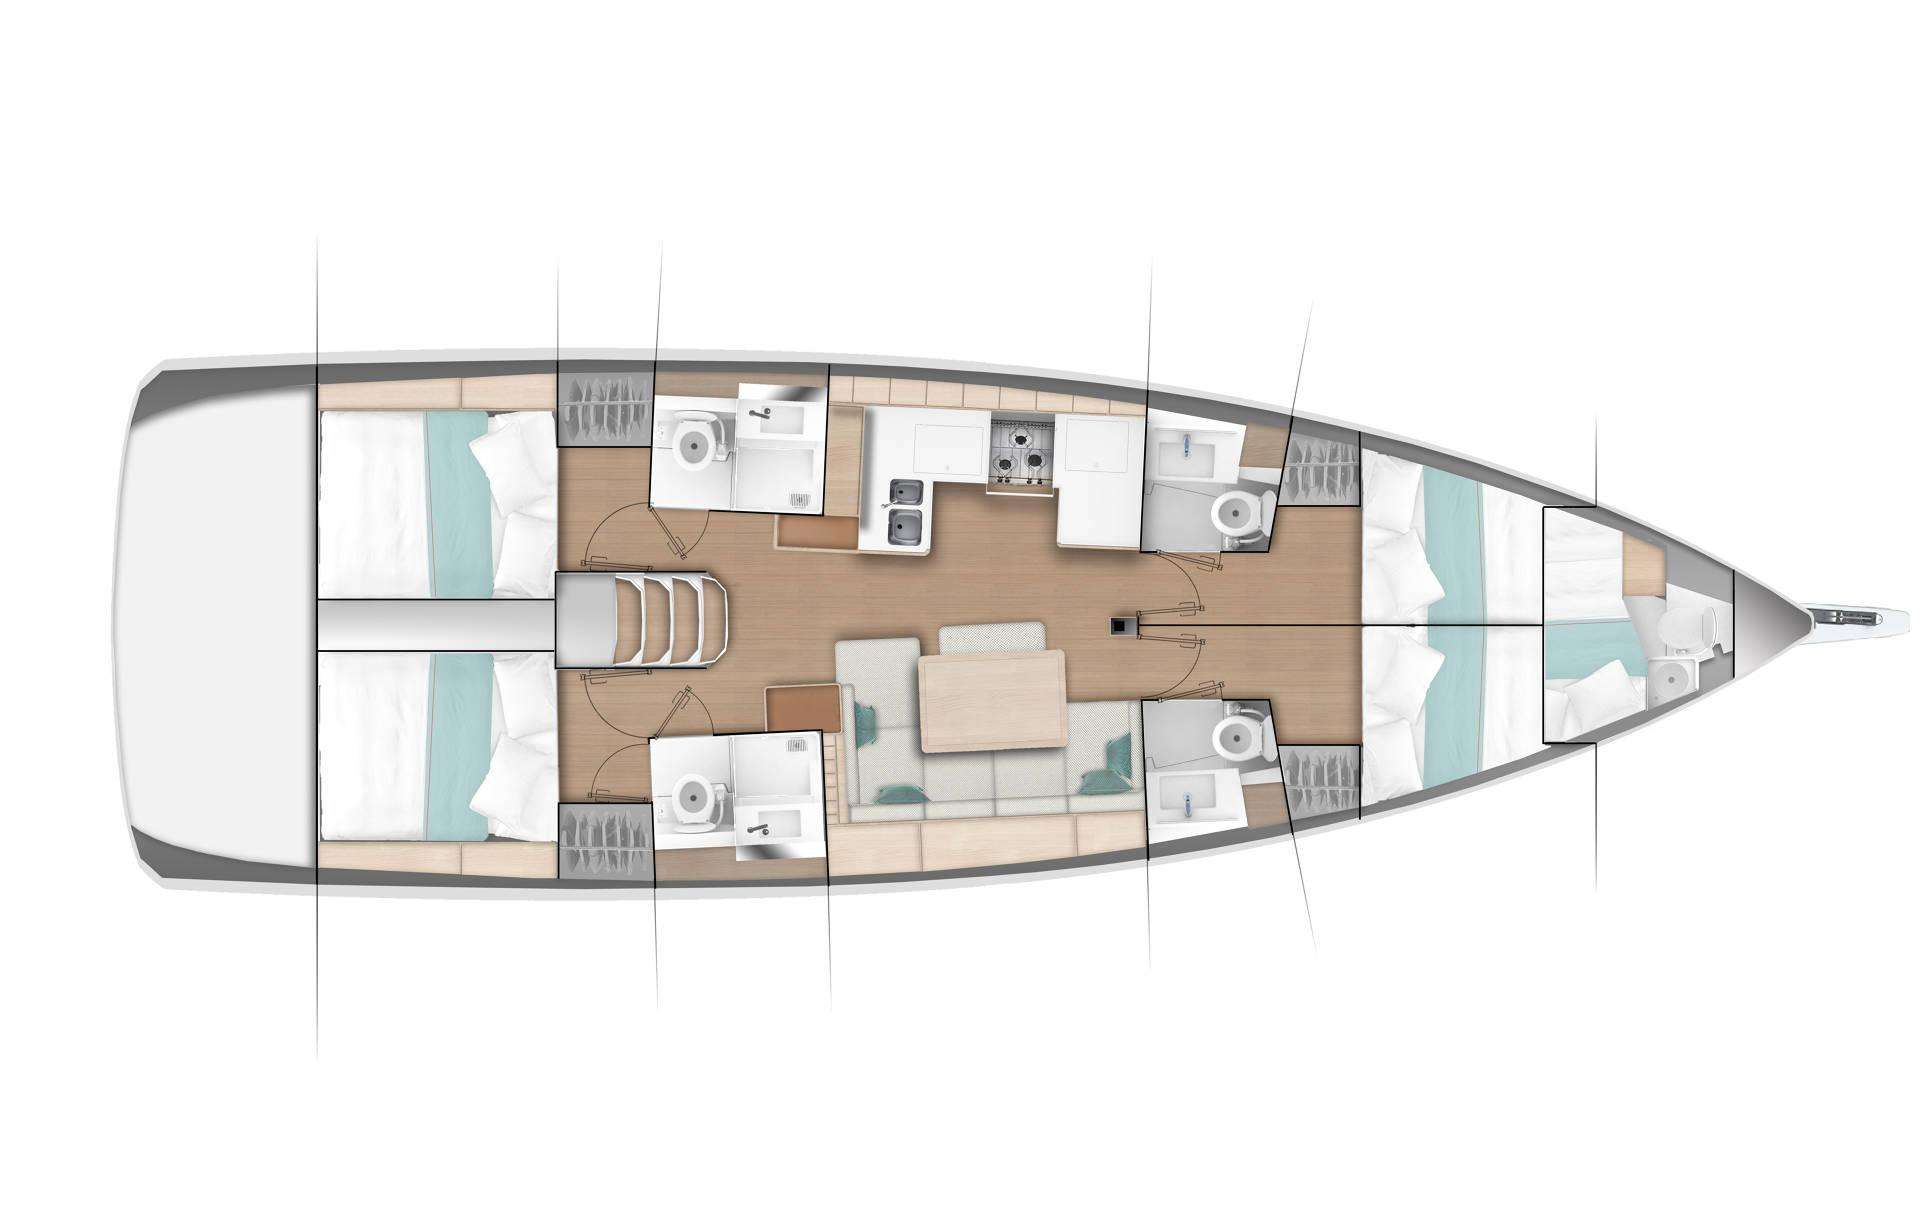 BRIGHT NEW and contemporary sailboat Jeanneau Sun Odyssey 490